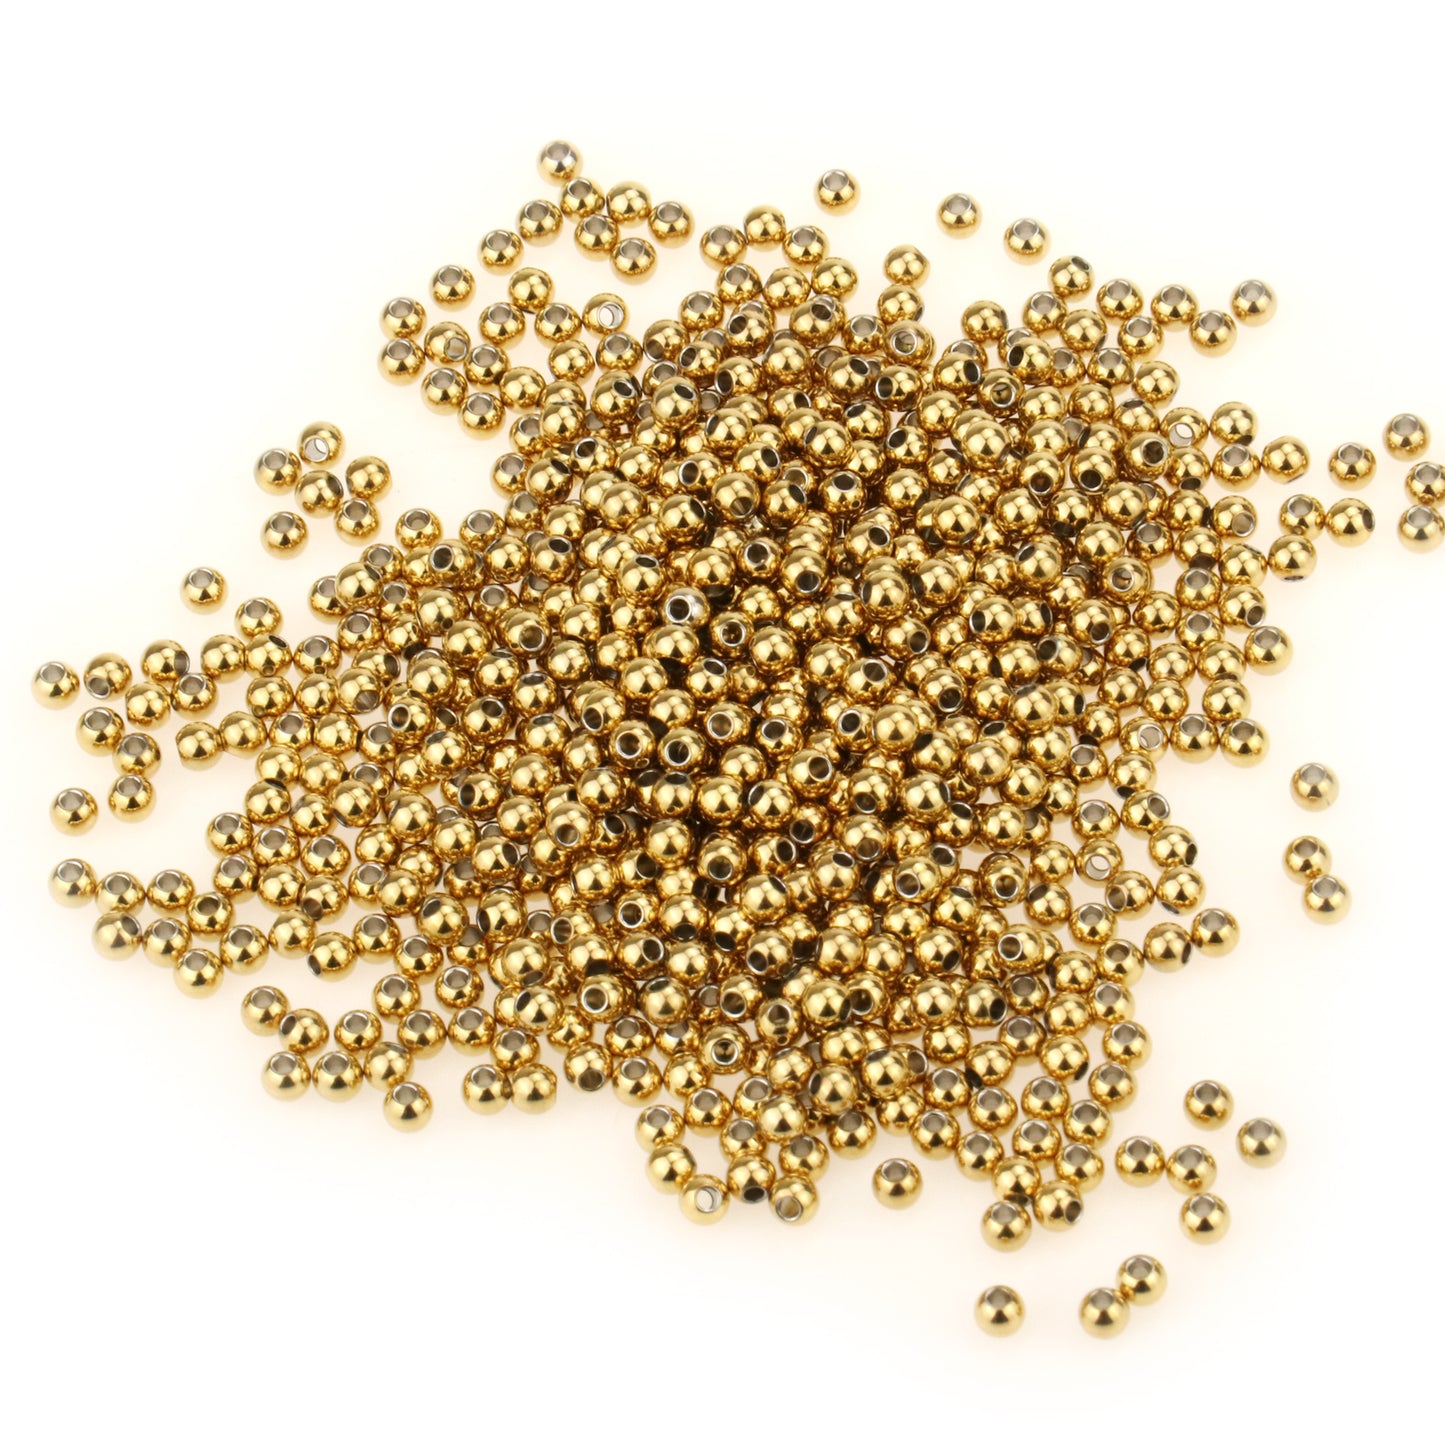 200PCS 4MM/5MM/6MM/8MM Gold Plated Stainless Steel Beads for DIY Jewelry Making